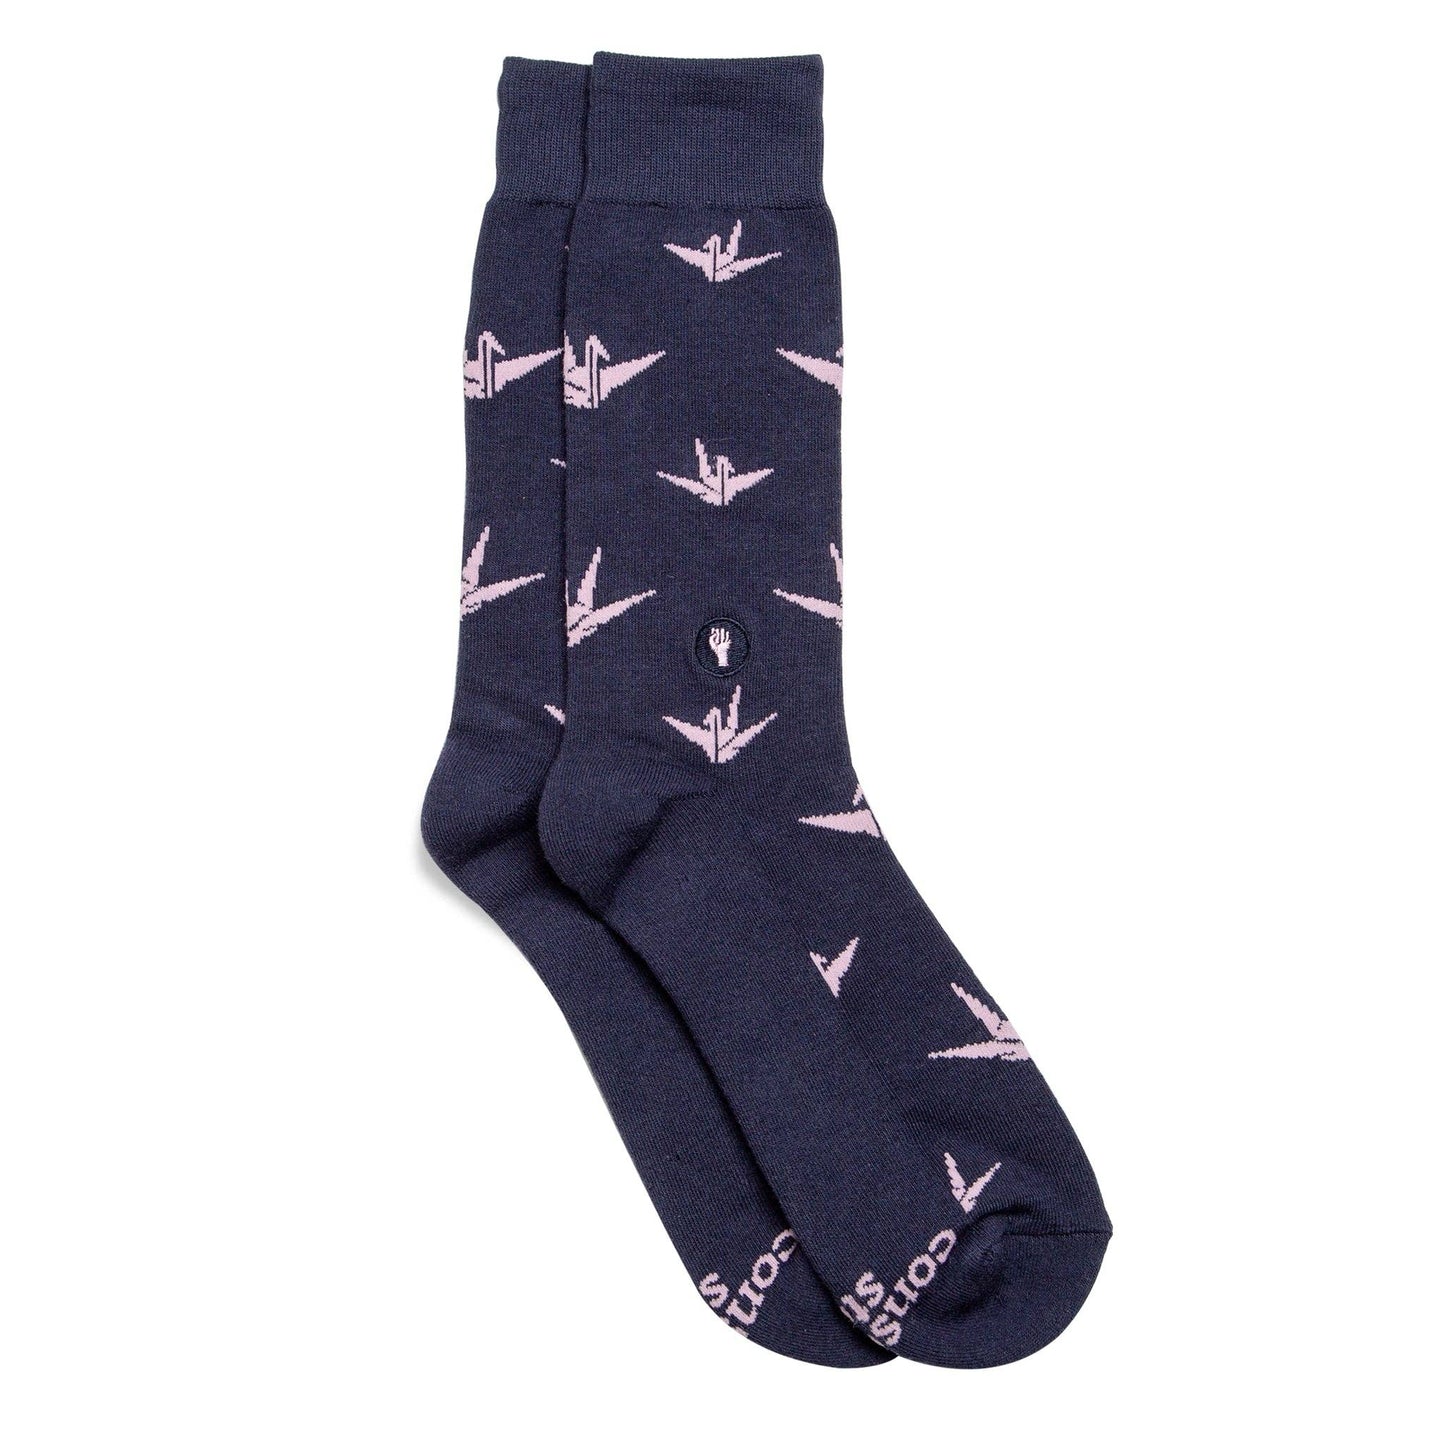 Socks that Fight for Equality Navy (Medium) Accessories Conscious Step   